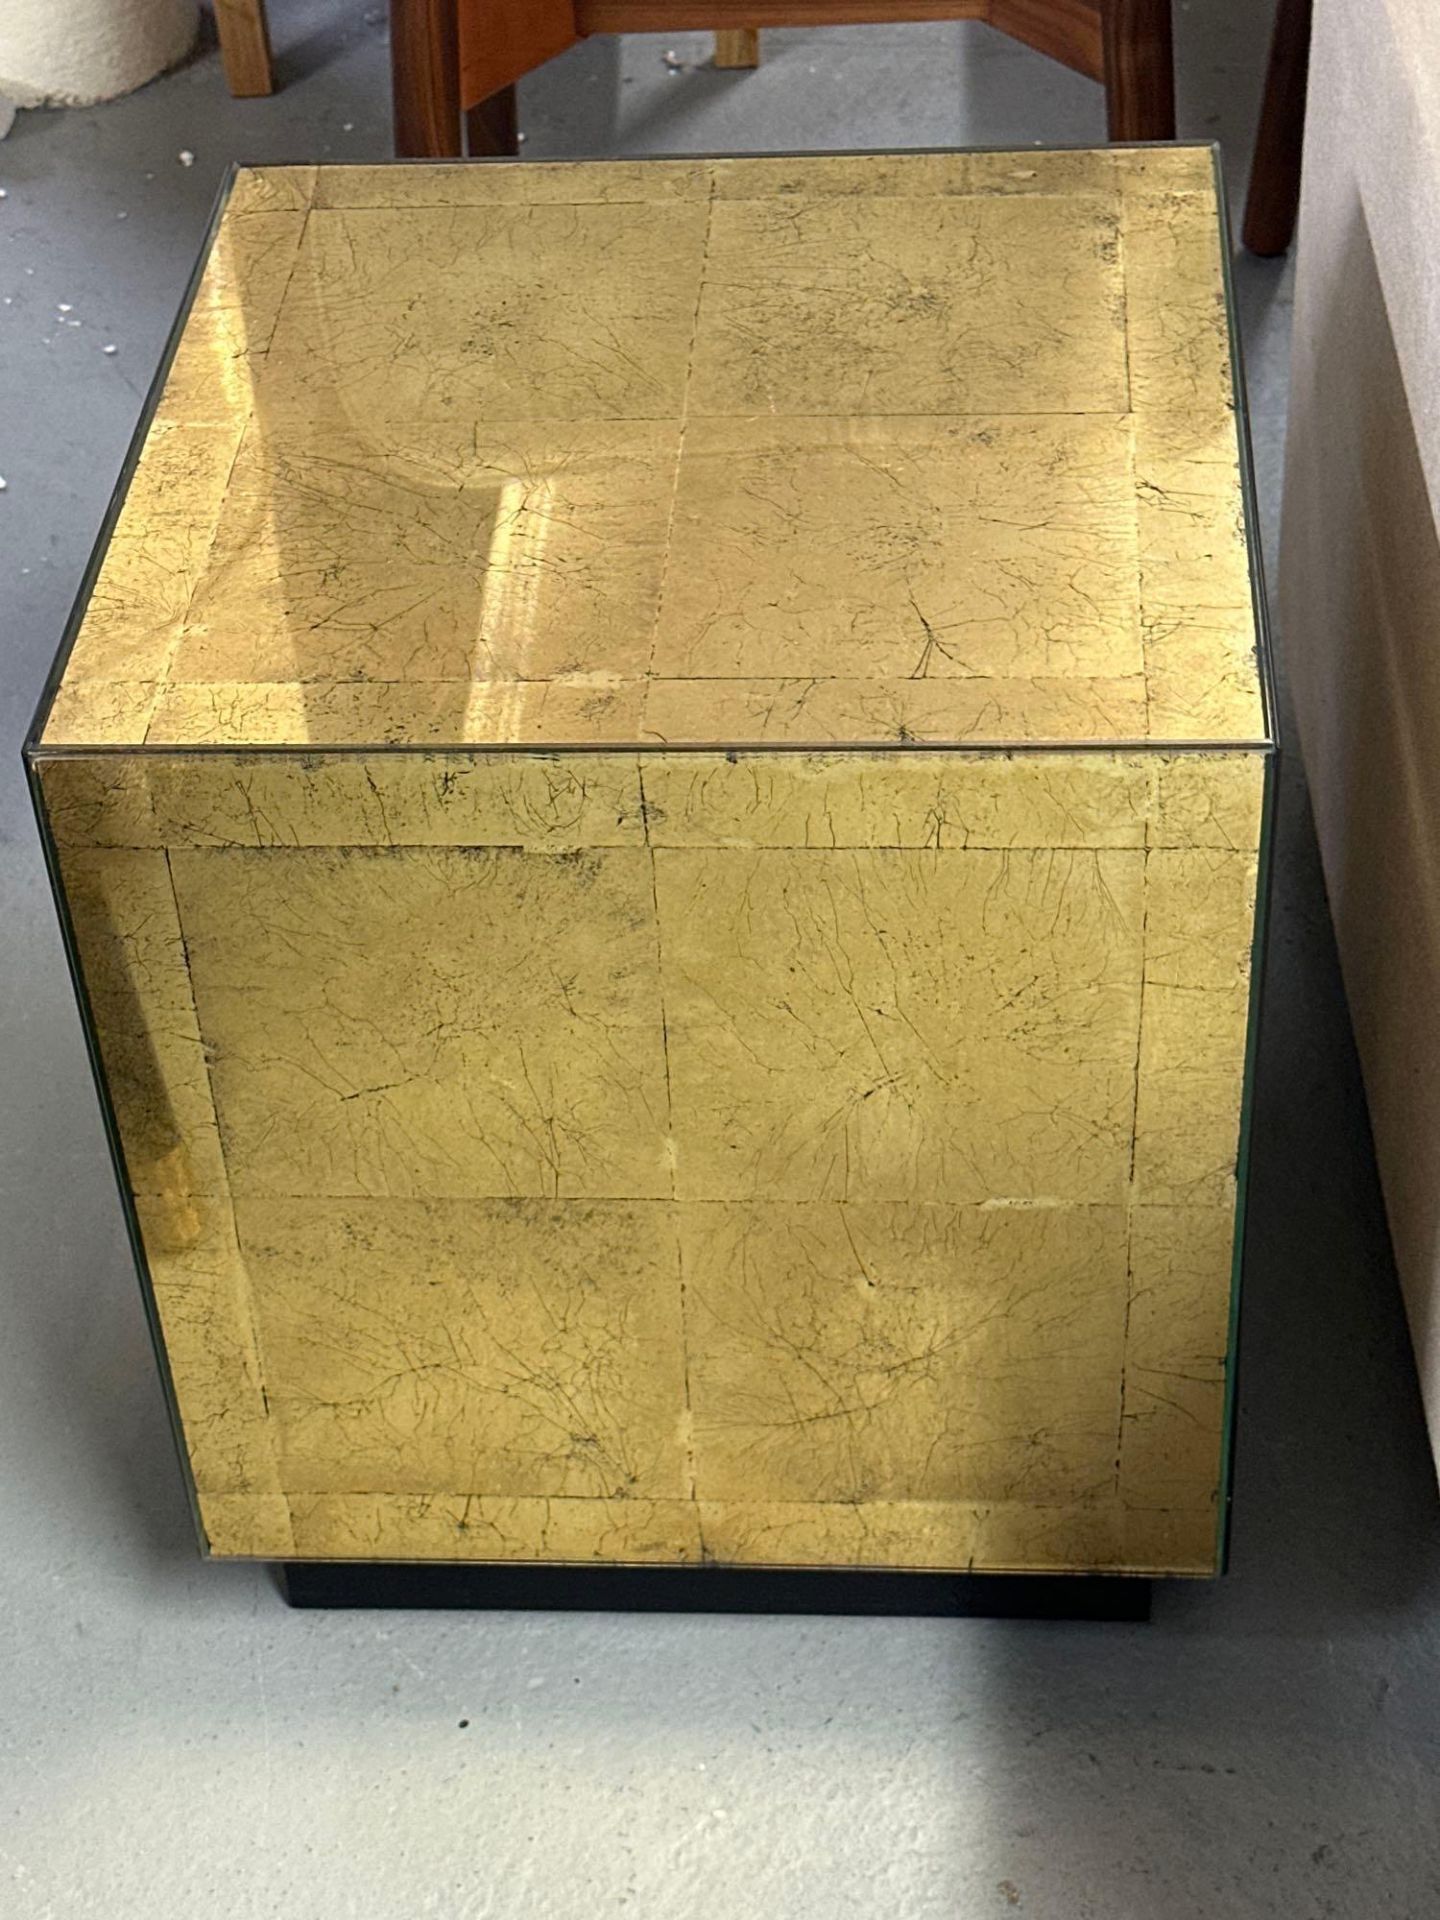 Gatsby Side Table The Gatsby Side Table Displays A Cubic Form With Hand-Applied Gilt Leaf Under - Image 2 of 3